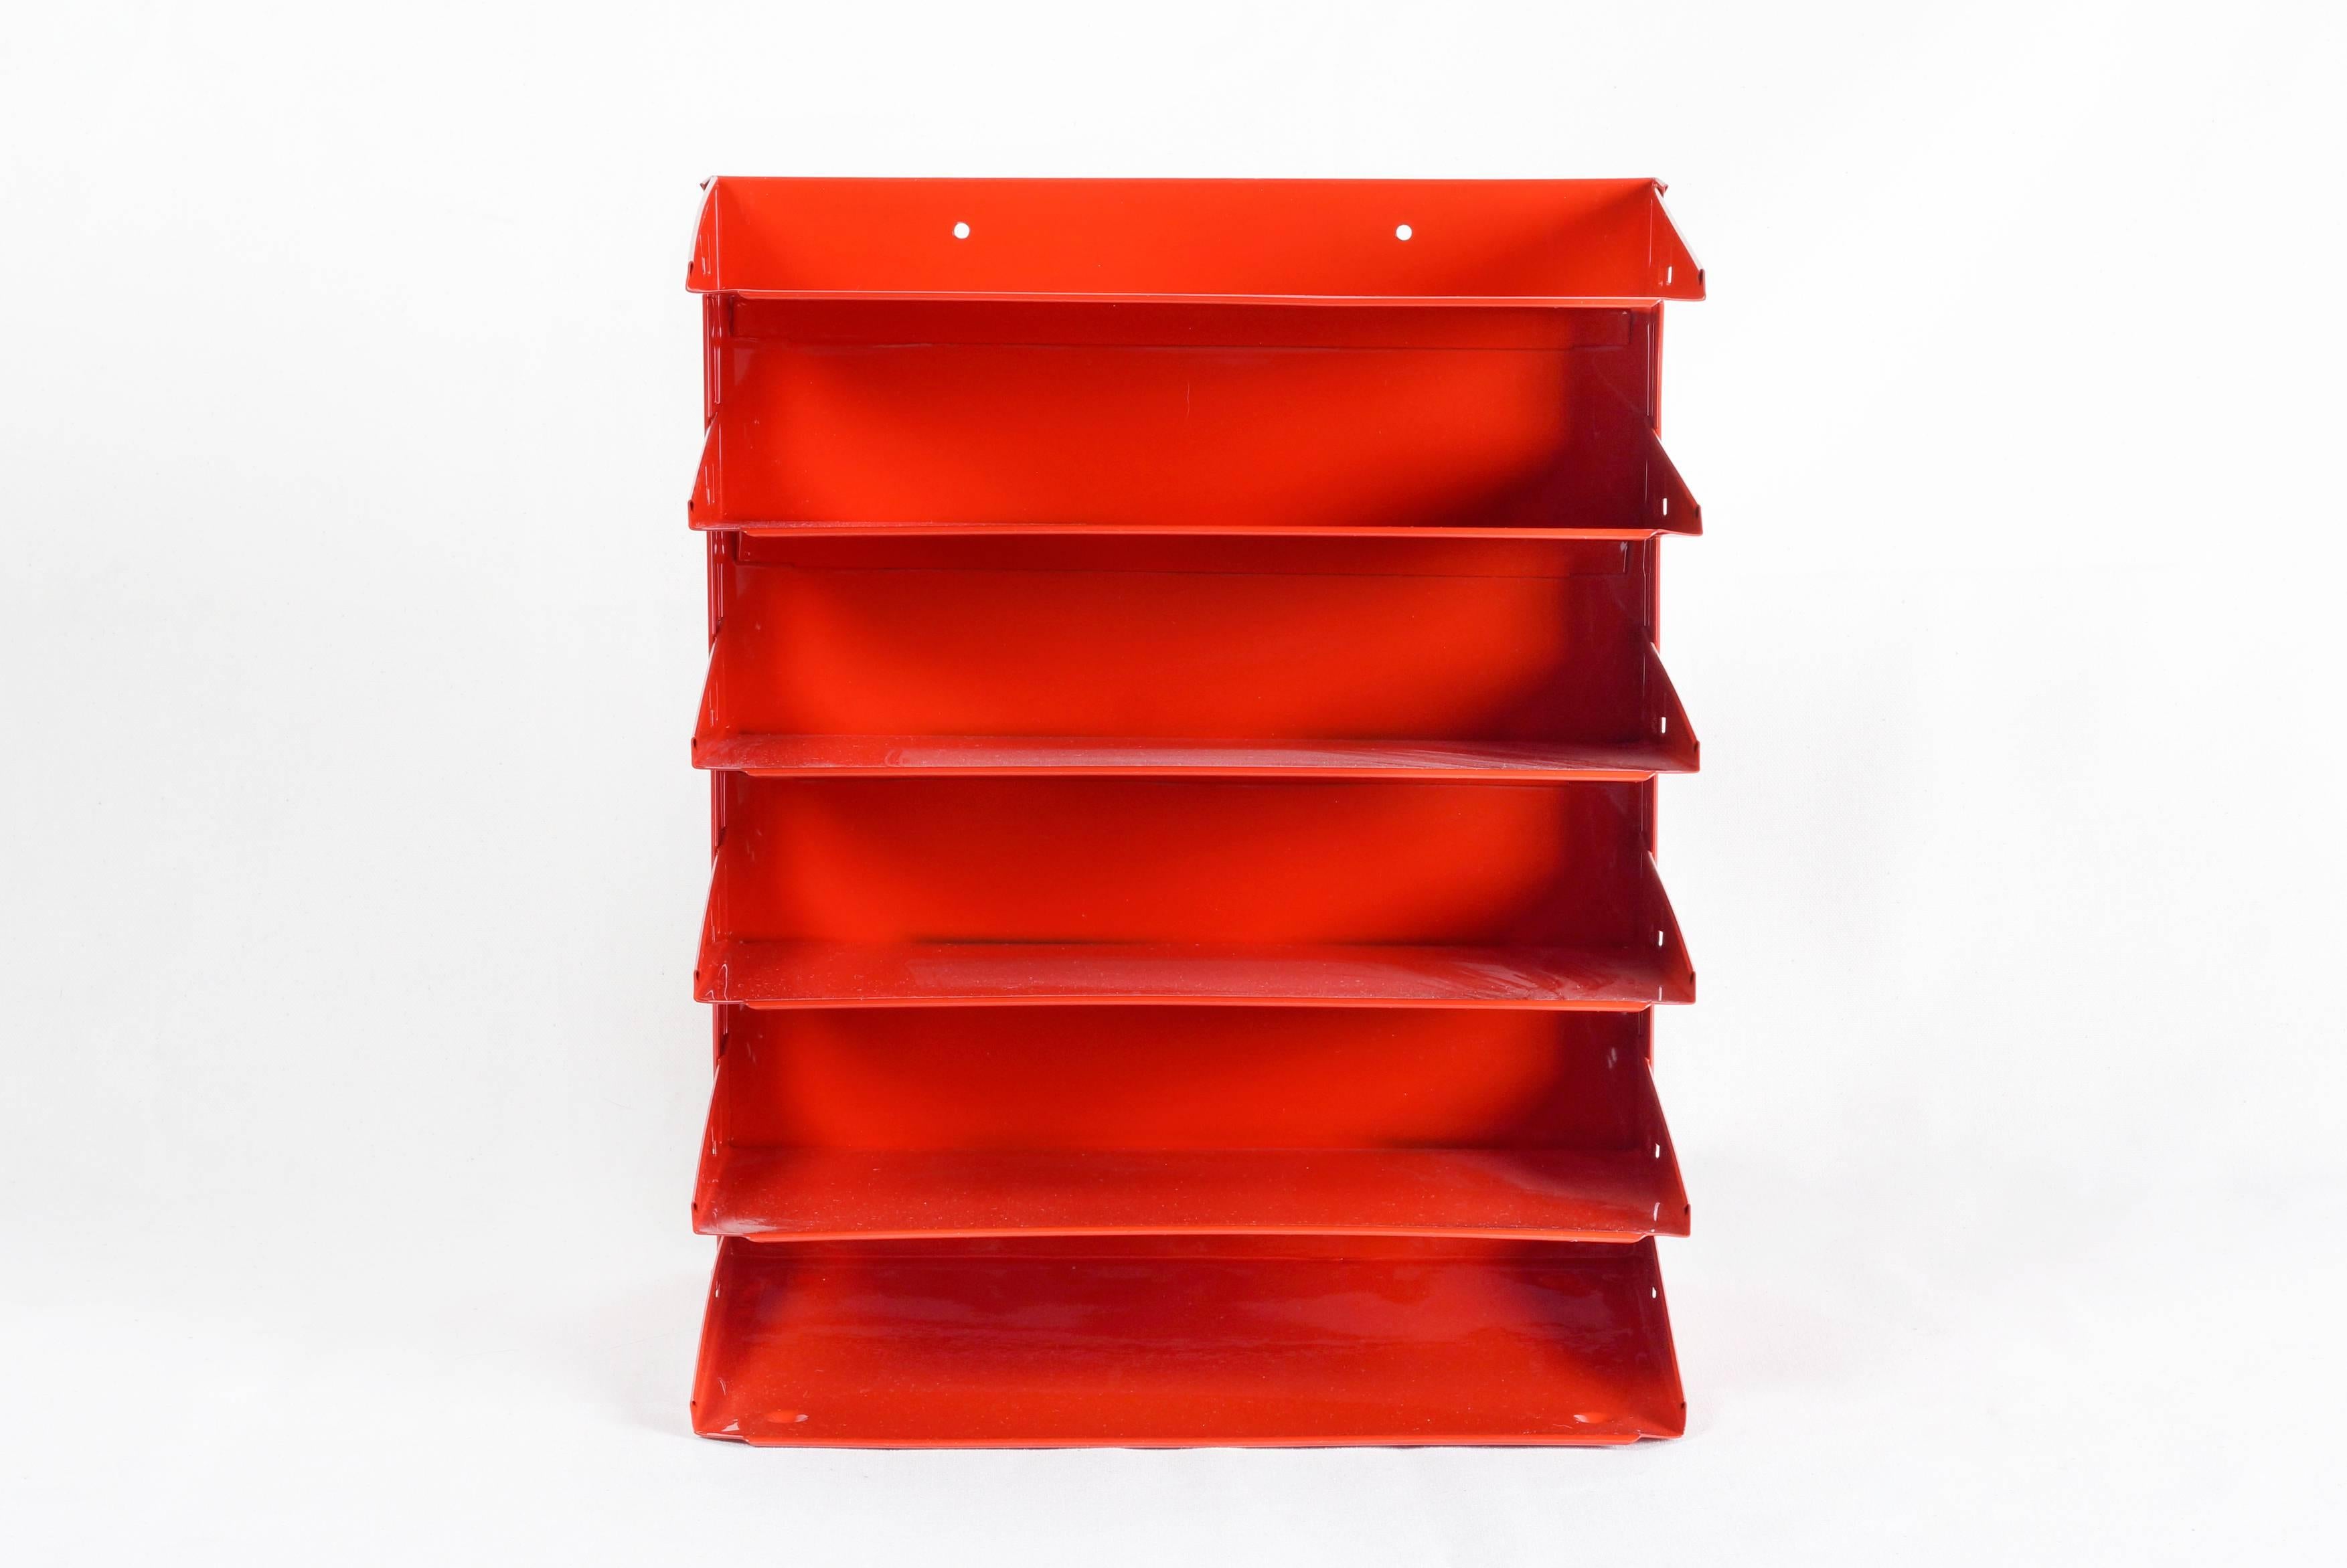 1970s retro office organizer refinished fire engine red. This iconic accessory is multifunctional, ideal for sorting mail, memos or magazines. Features six slots sure to keep your desk in tip-top shape. Easily wall-mounts.

Dimensions: 9